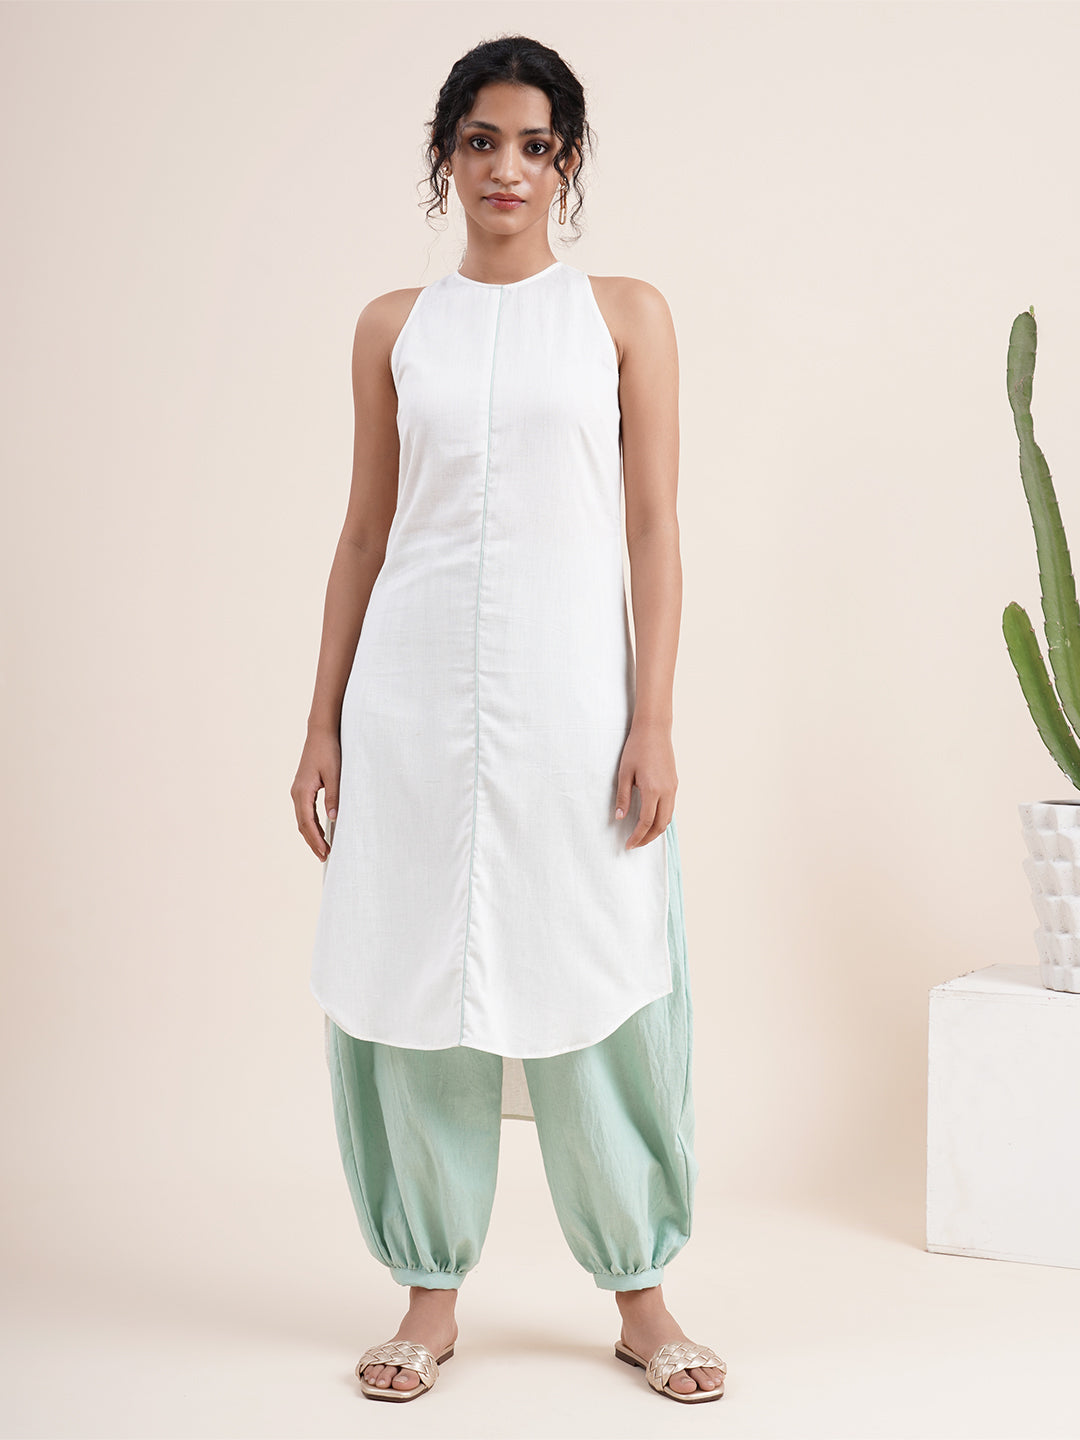 White High low Kurta paired with pathani pants